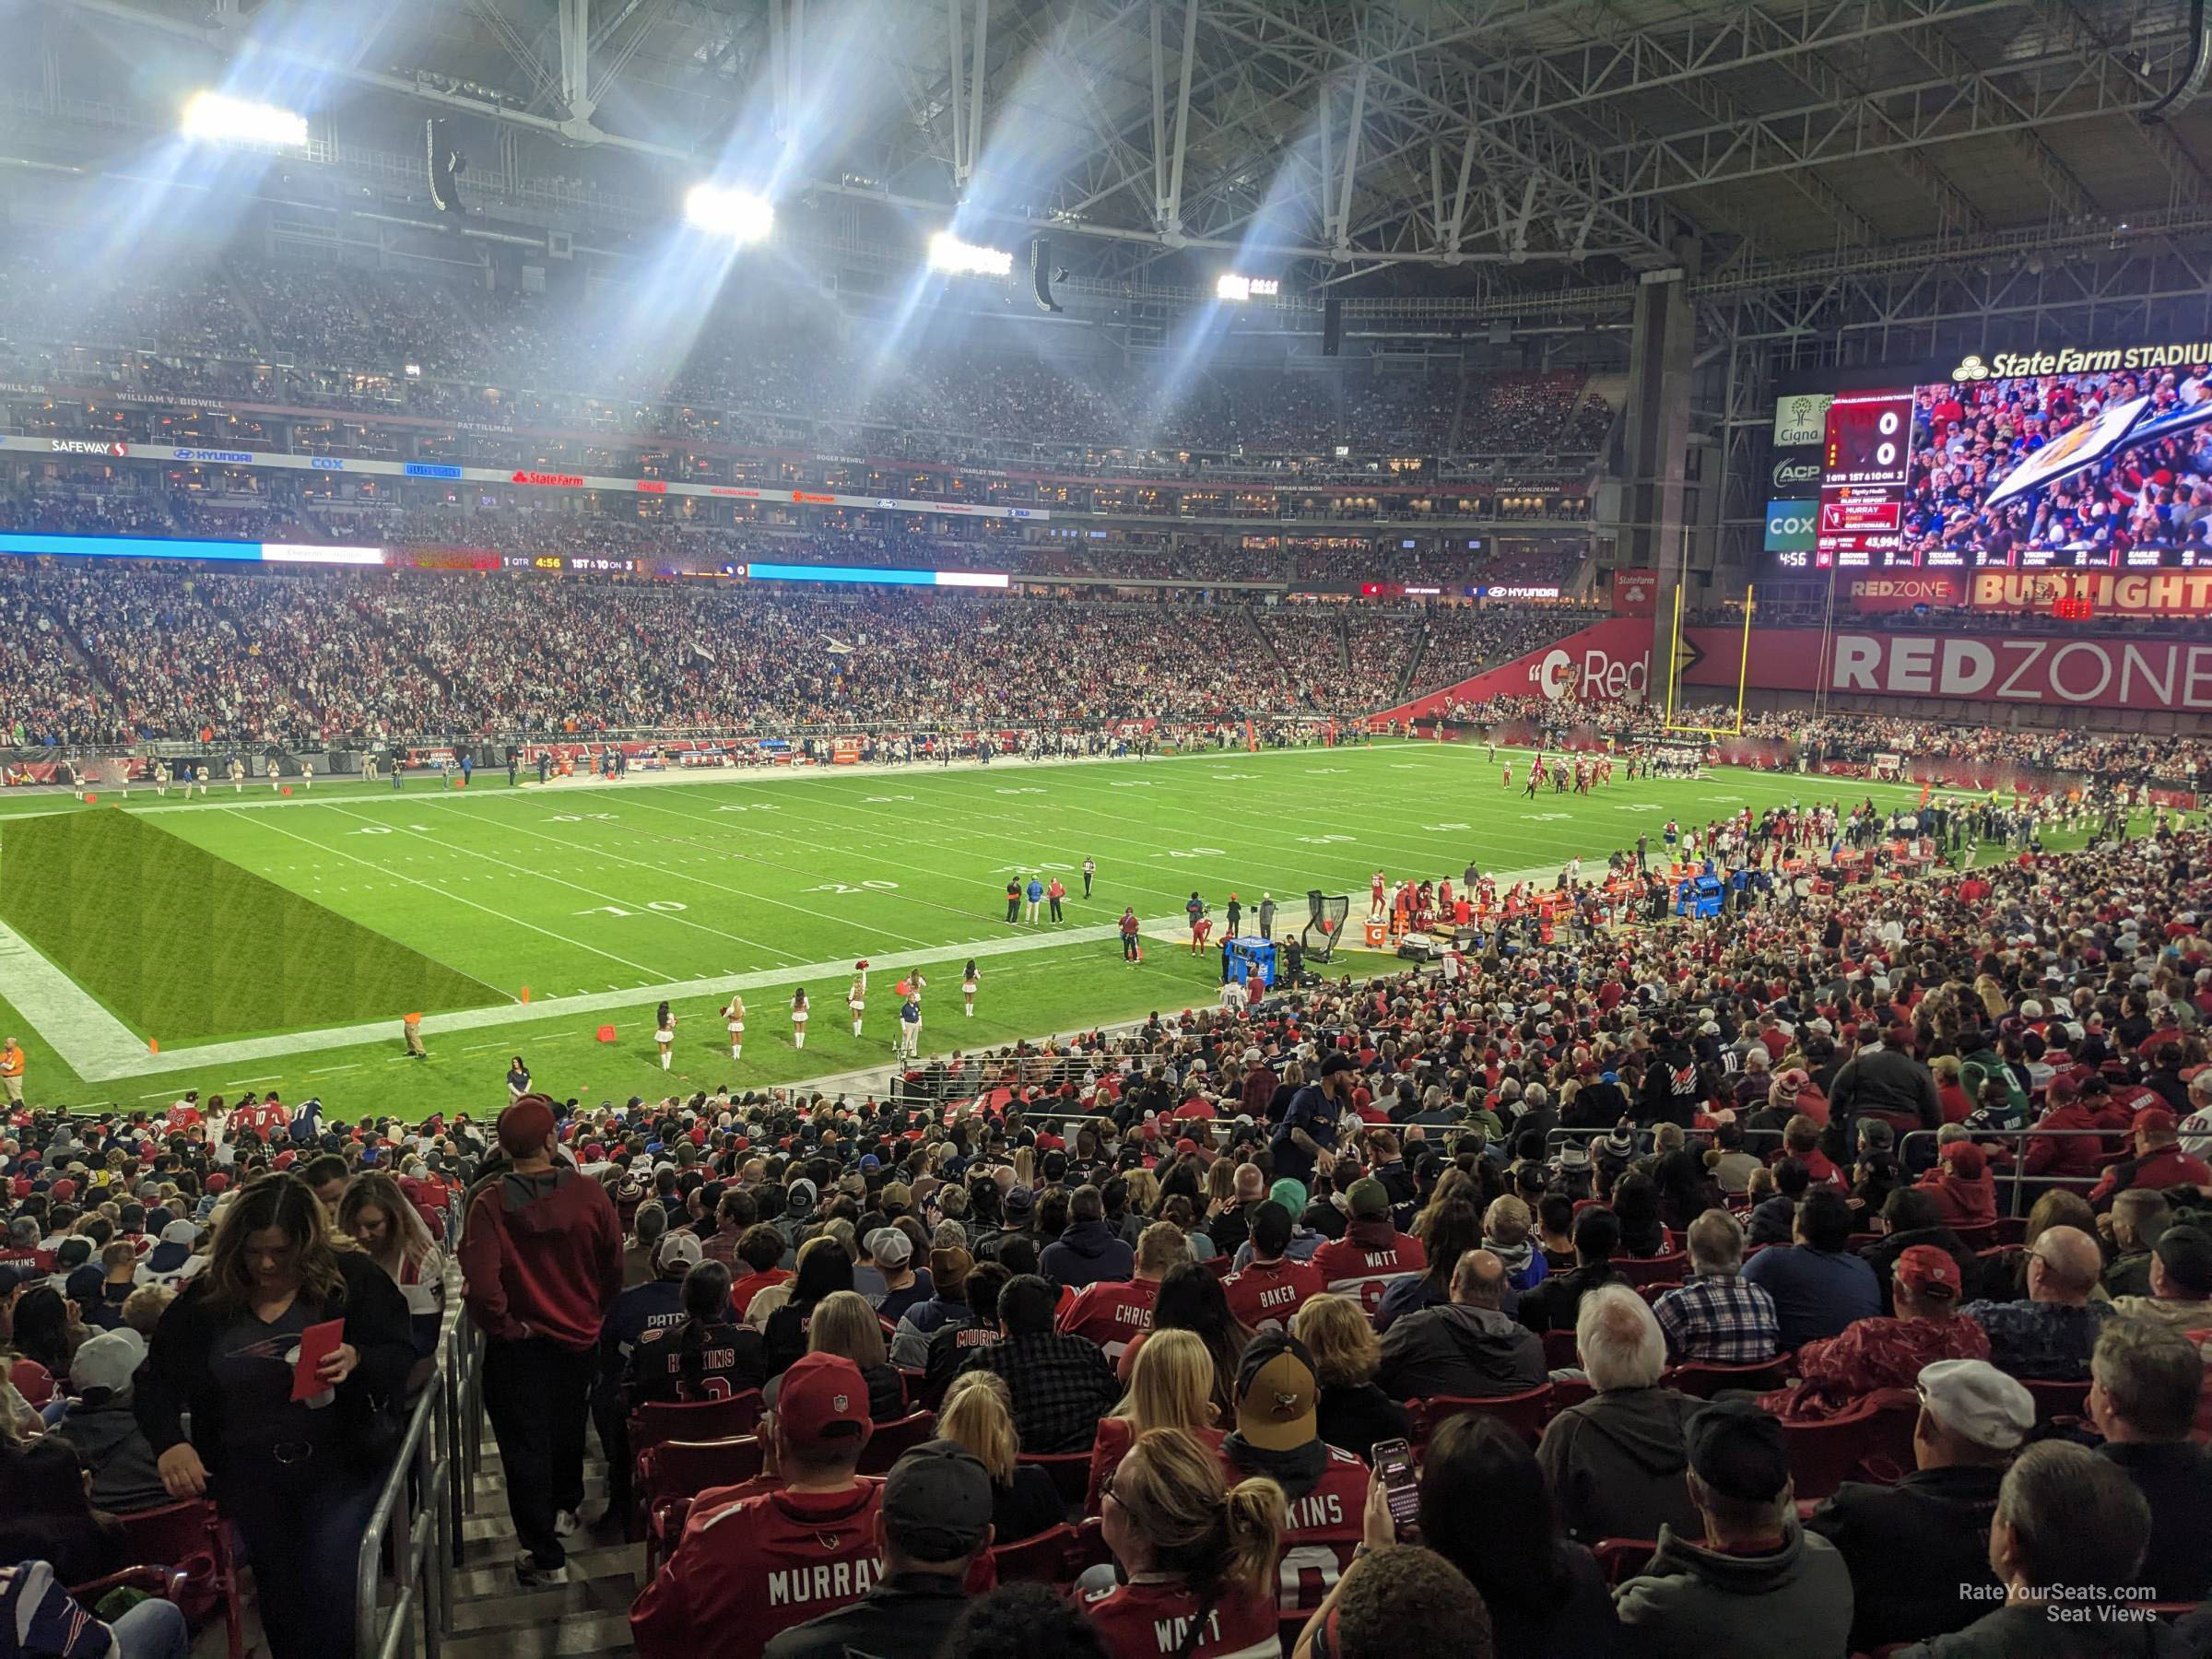 section 113, row 41 seat view  for football - state farm stadium